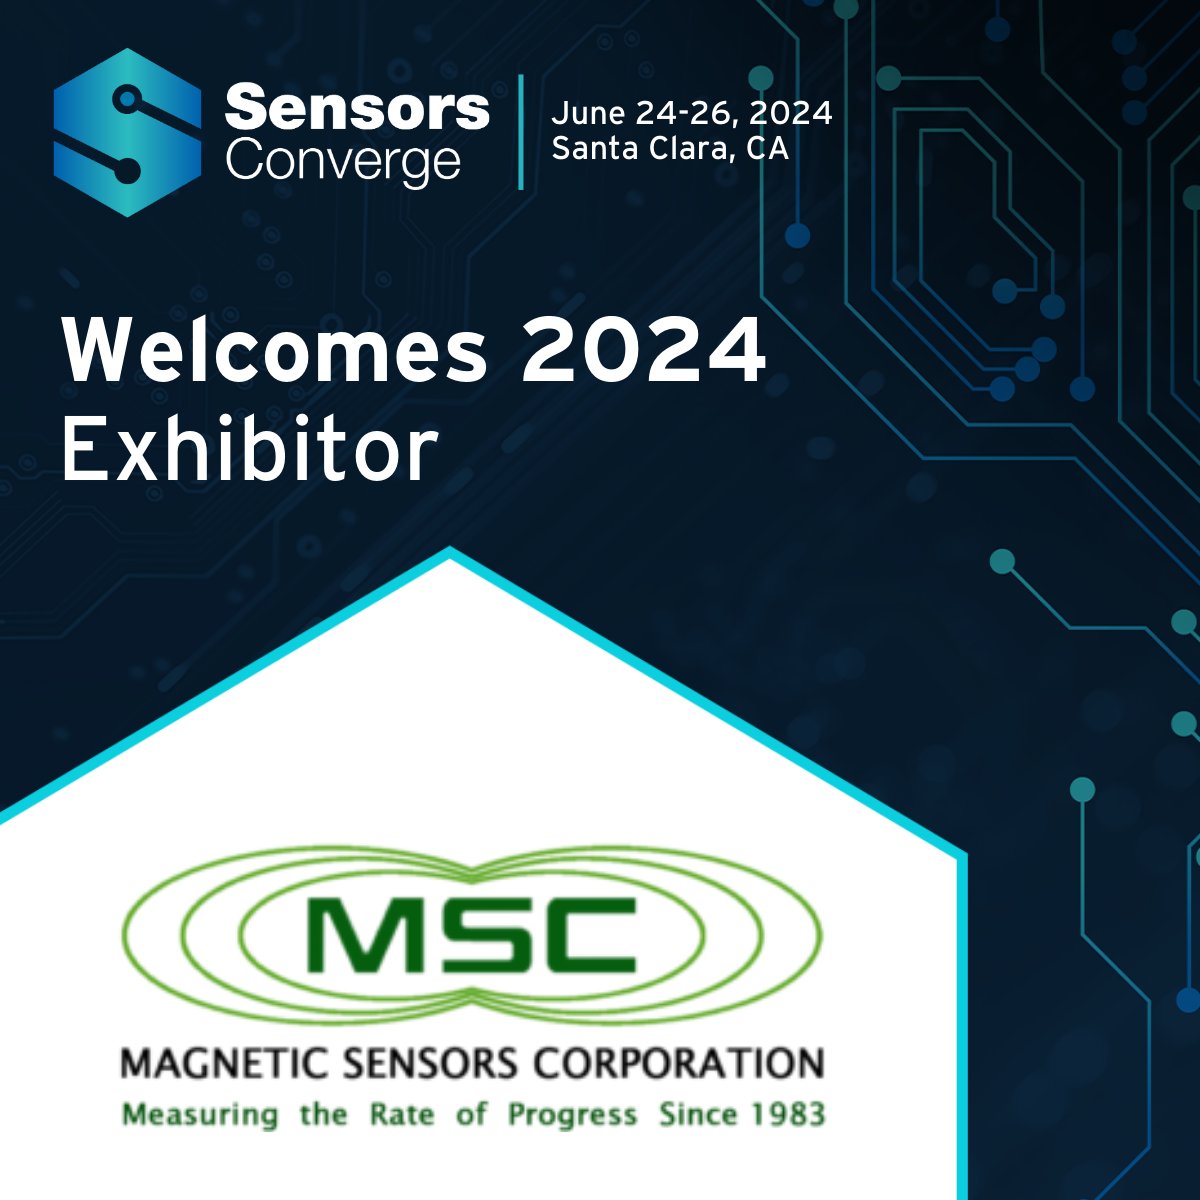 Welcome Magnetic Sensors to #SensorsConverge

Magnetic Sensors specializes in offering robust and versatile electrical components such as magnetic speed sensors and custom coil solutions.  magsensors.com

Register: June 24-26 in Santa Clara sensorsconverge.com/sensorsconverg…